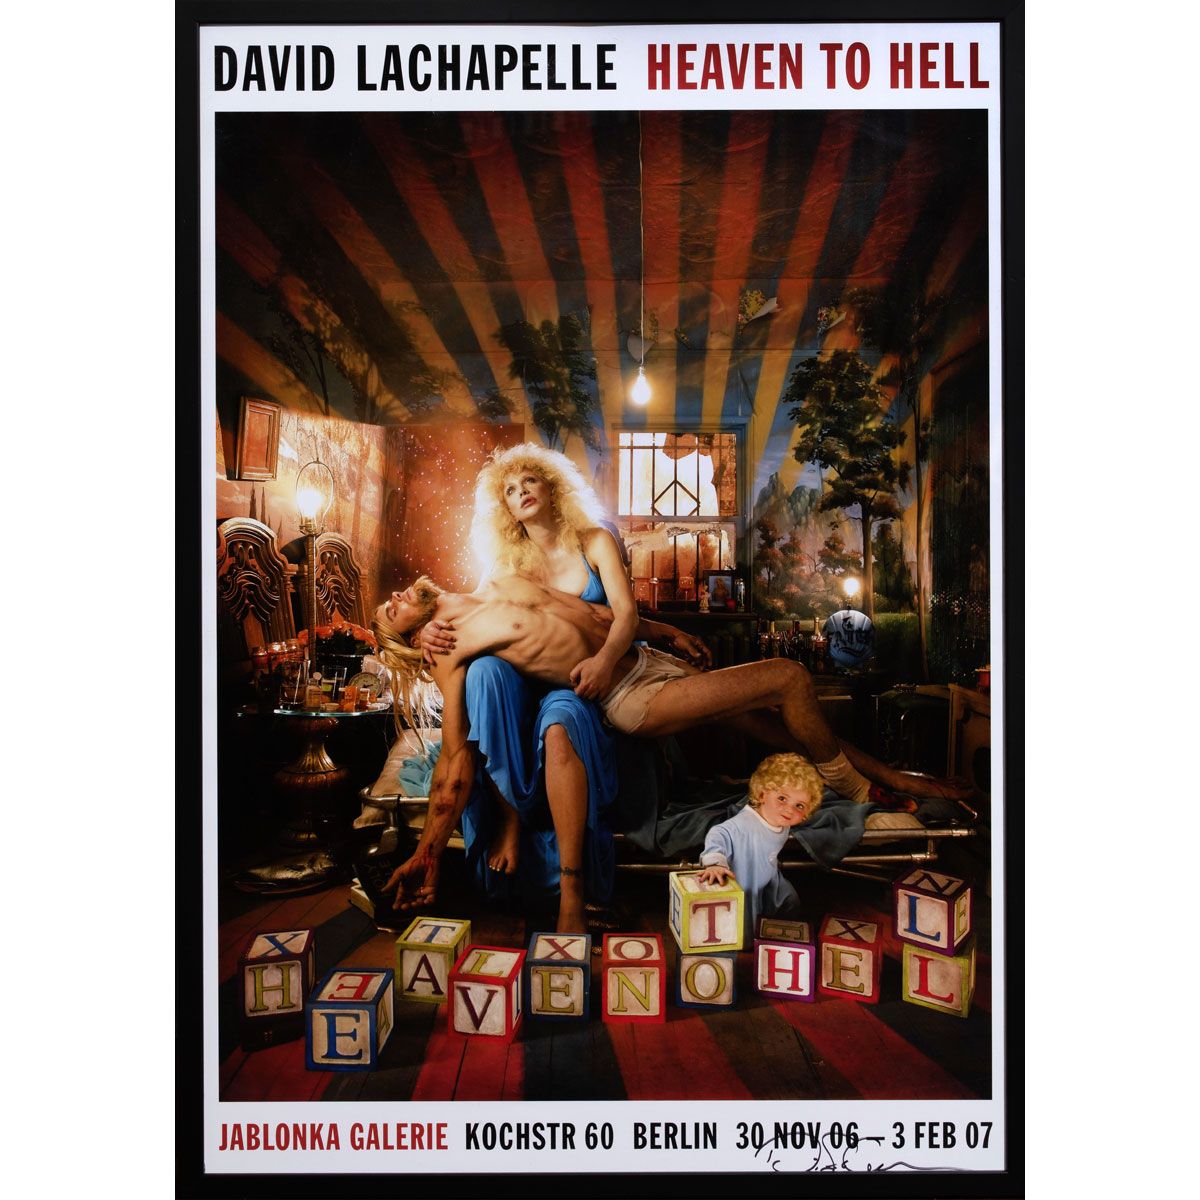 Null David LA CHAPELLE, American, born in 1963

Heaven to Hell - Kurt Cobain and&hellip;